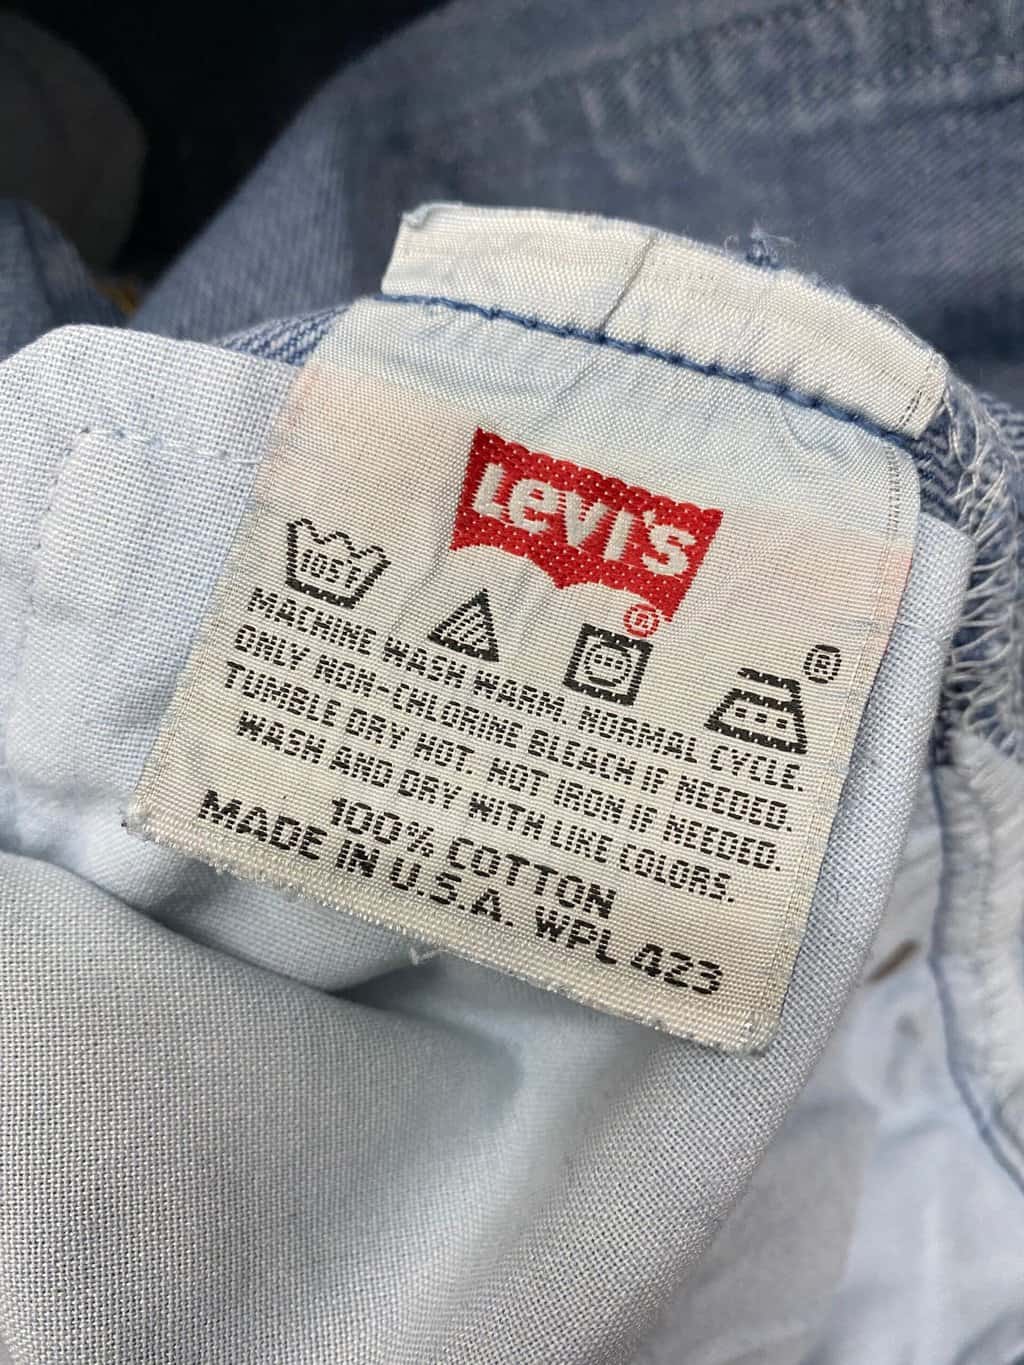 90s vintage Levis 501 jeans 34 x 32 USA made blue stonewash with red tab -  W34 x L32 - St Cyr Vintage